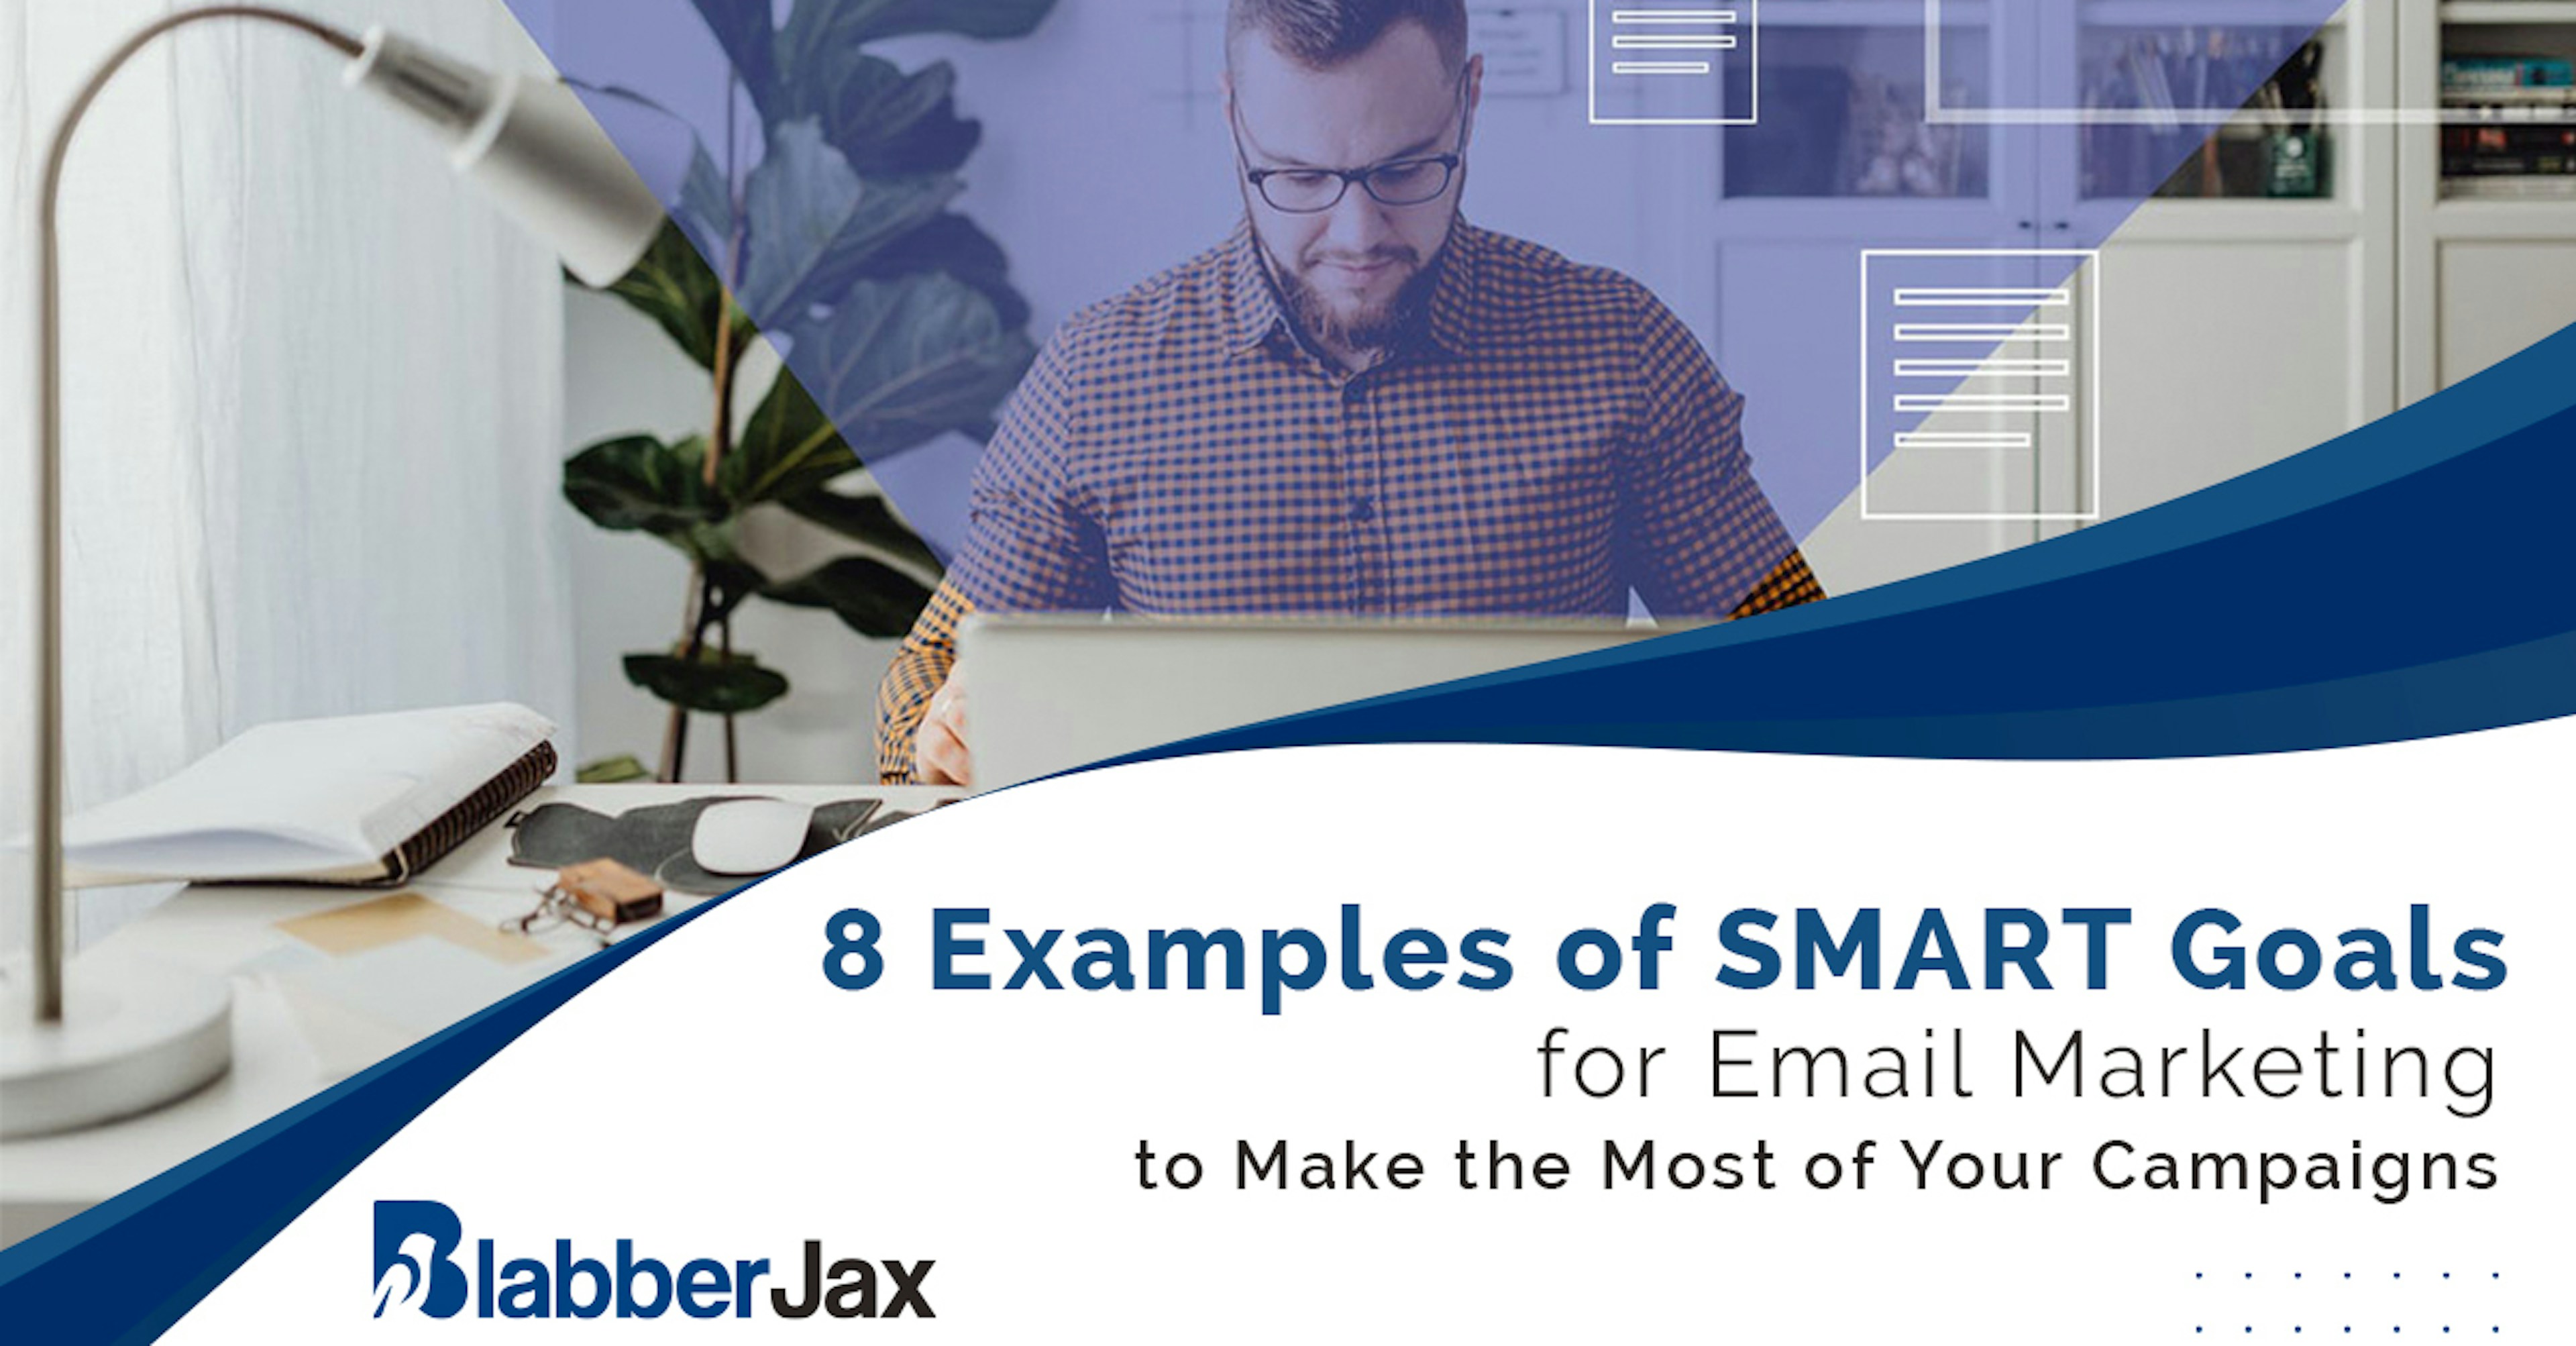 8 Examples of SMART Goals for Email Marketing to Make the Most of Your Campaigns